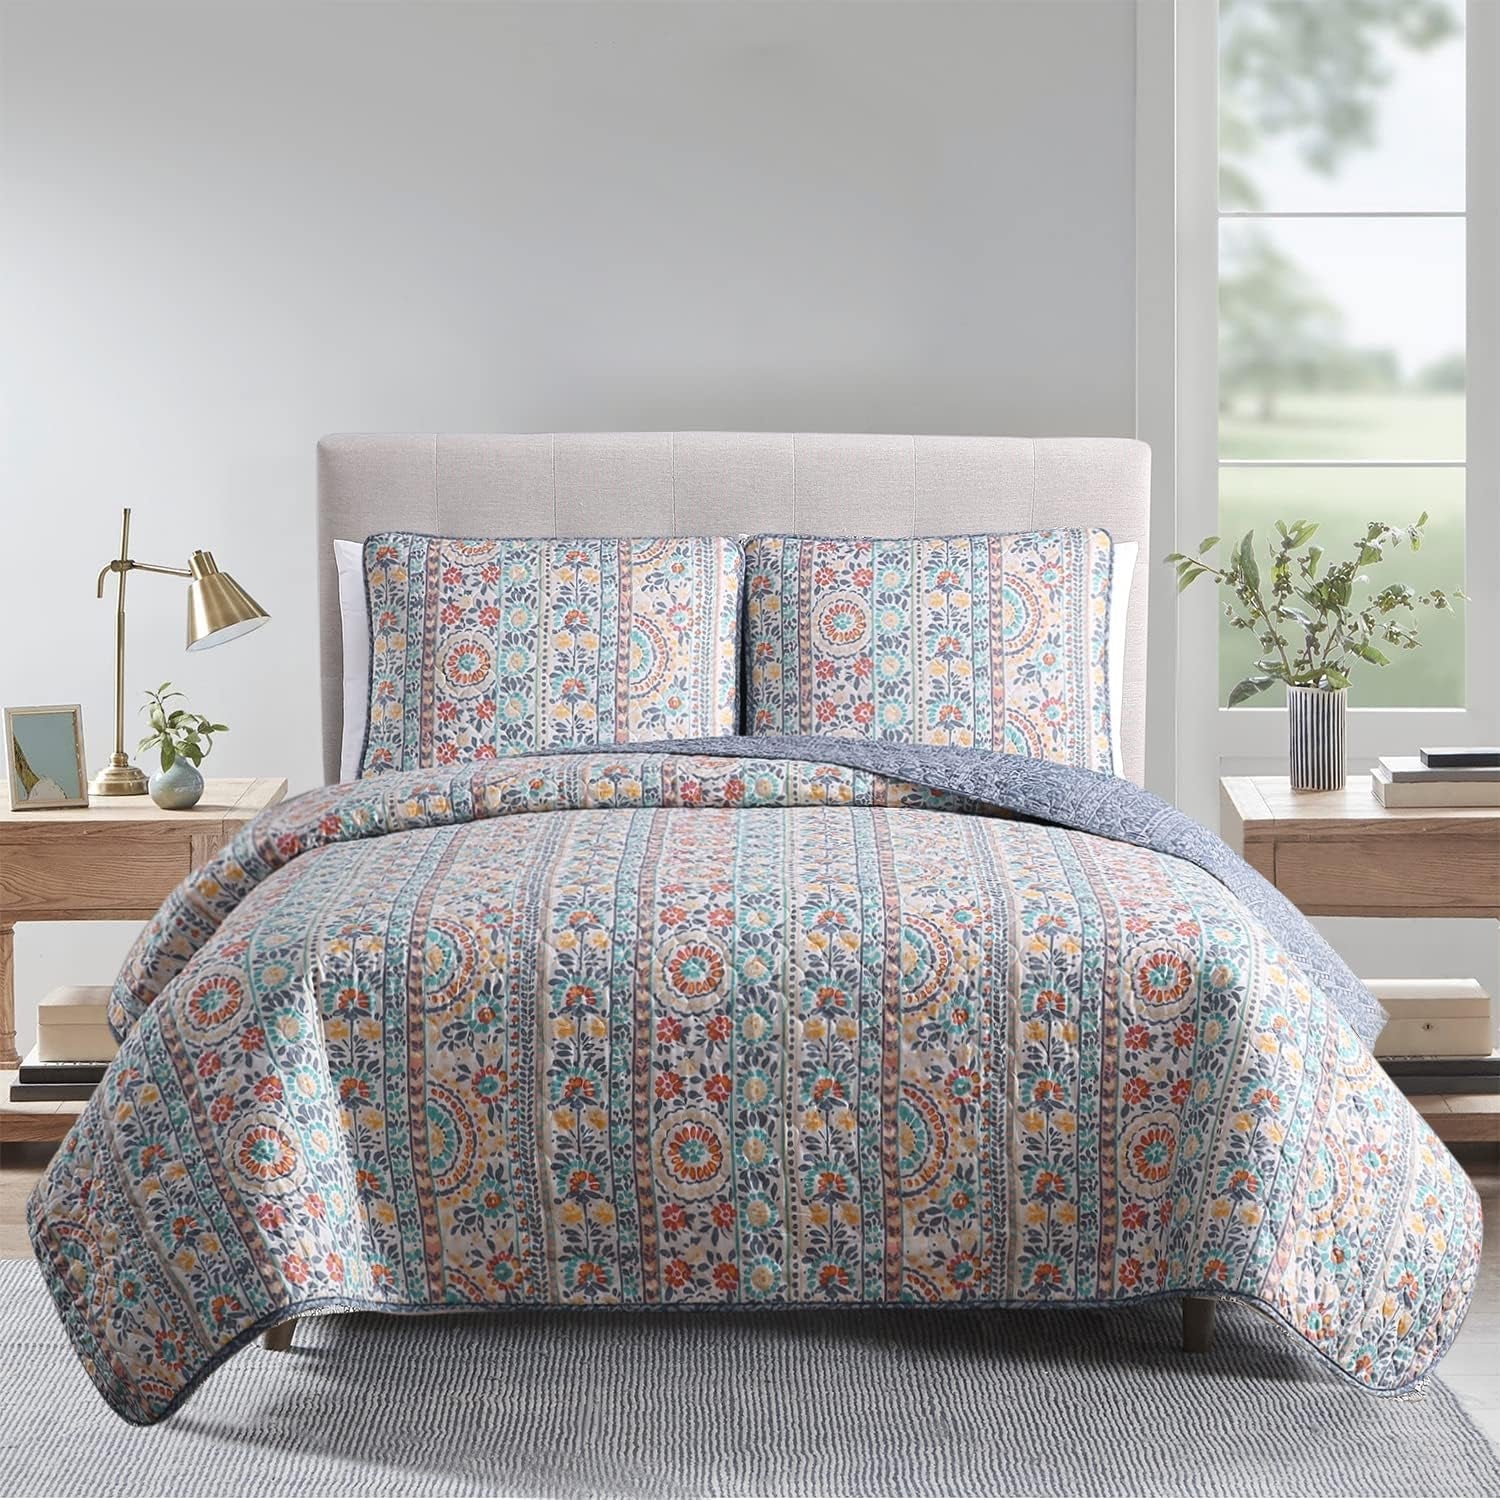 Bohemian Quilt Set Full Queen Size 3 Piece, Cosima Striped Pattern Printed Bedding Coverlet Set, Lightweight Soft Reversible Bedspread Sets for All Season (1 Quilt & 2 Pillow Shams)